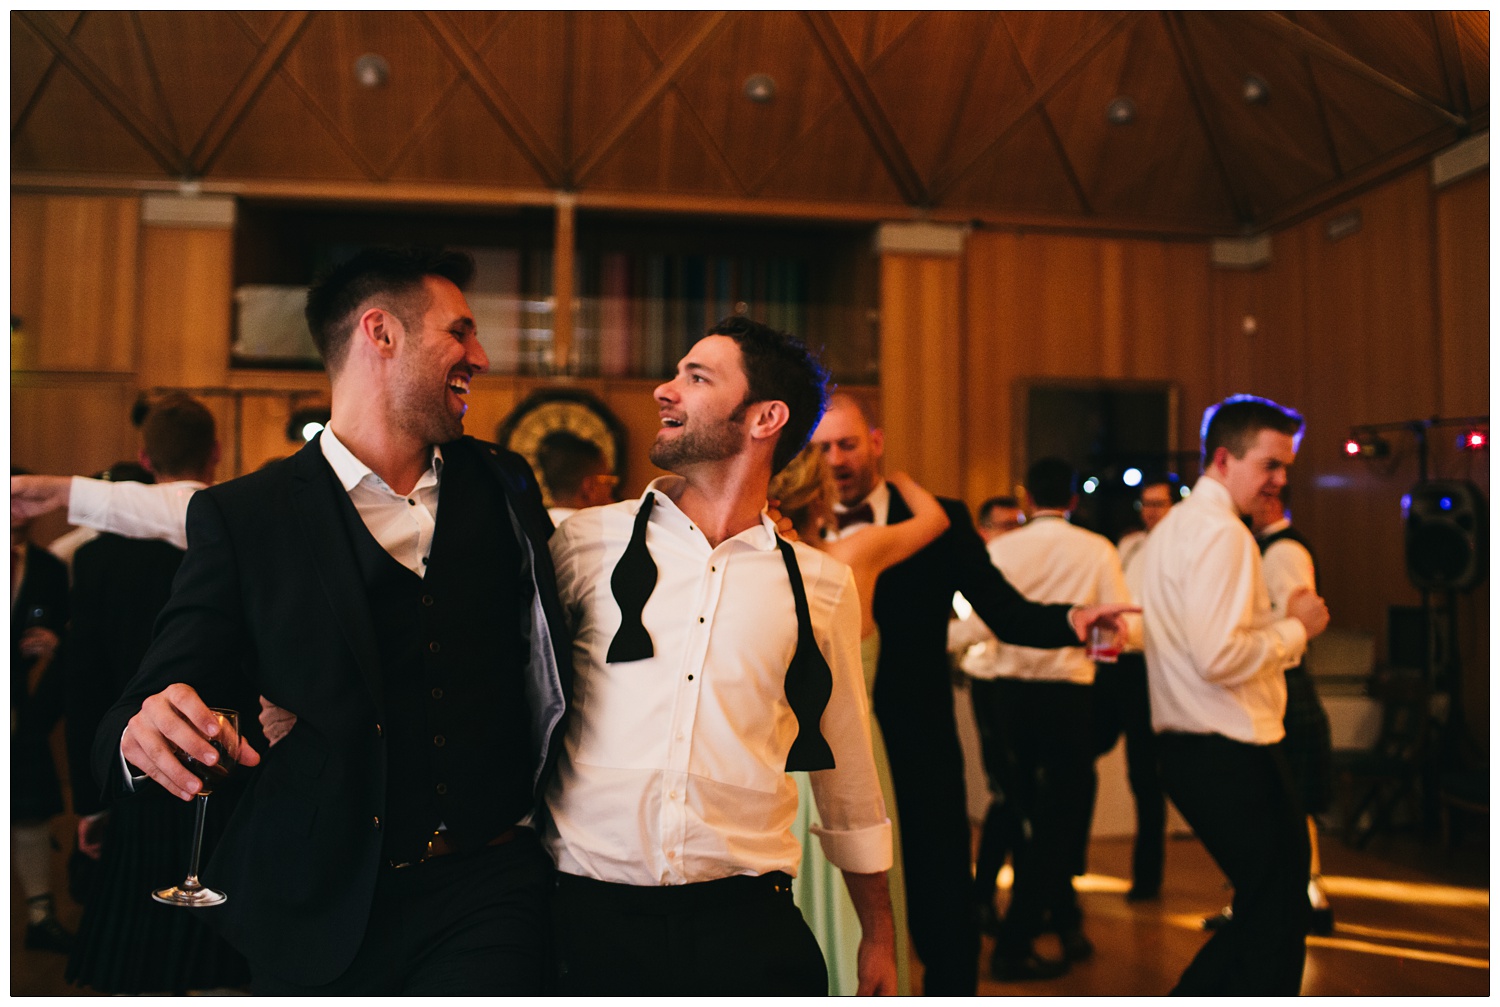 Two men dancing together. One has a bow tie undone.